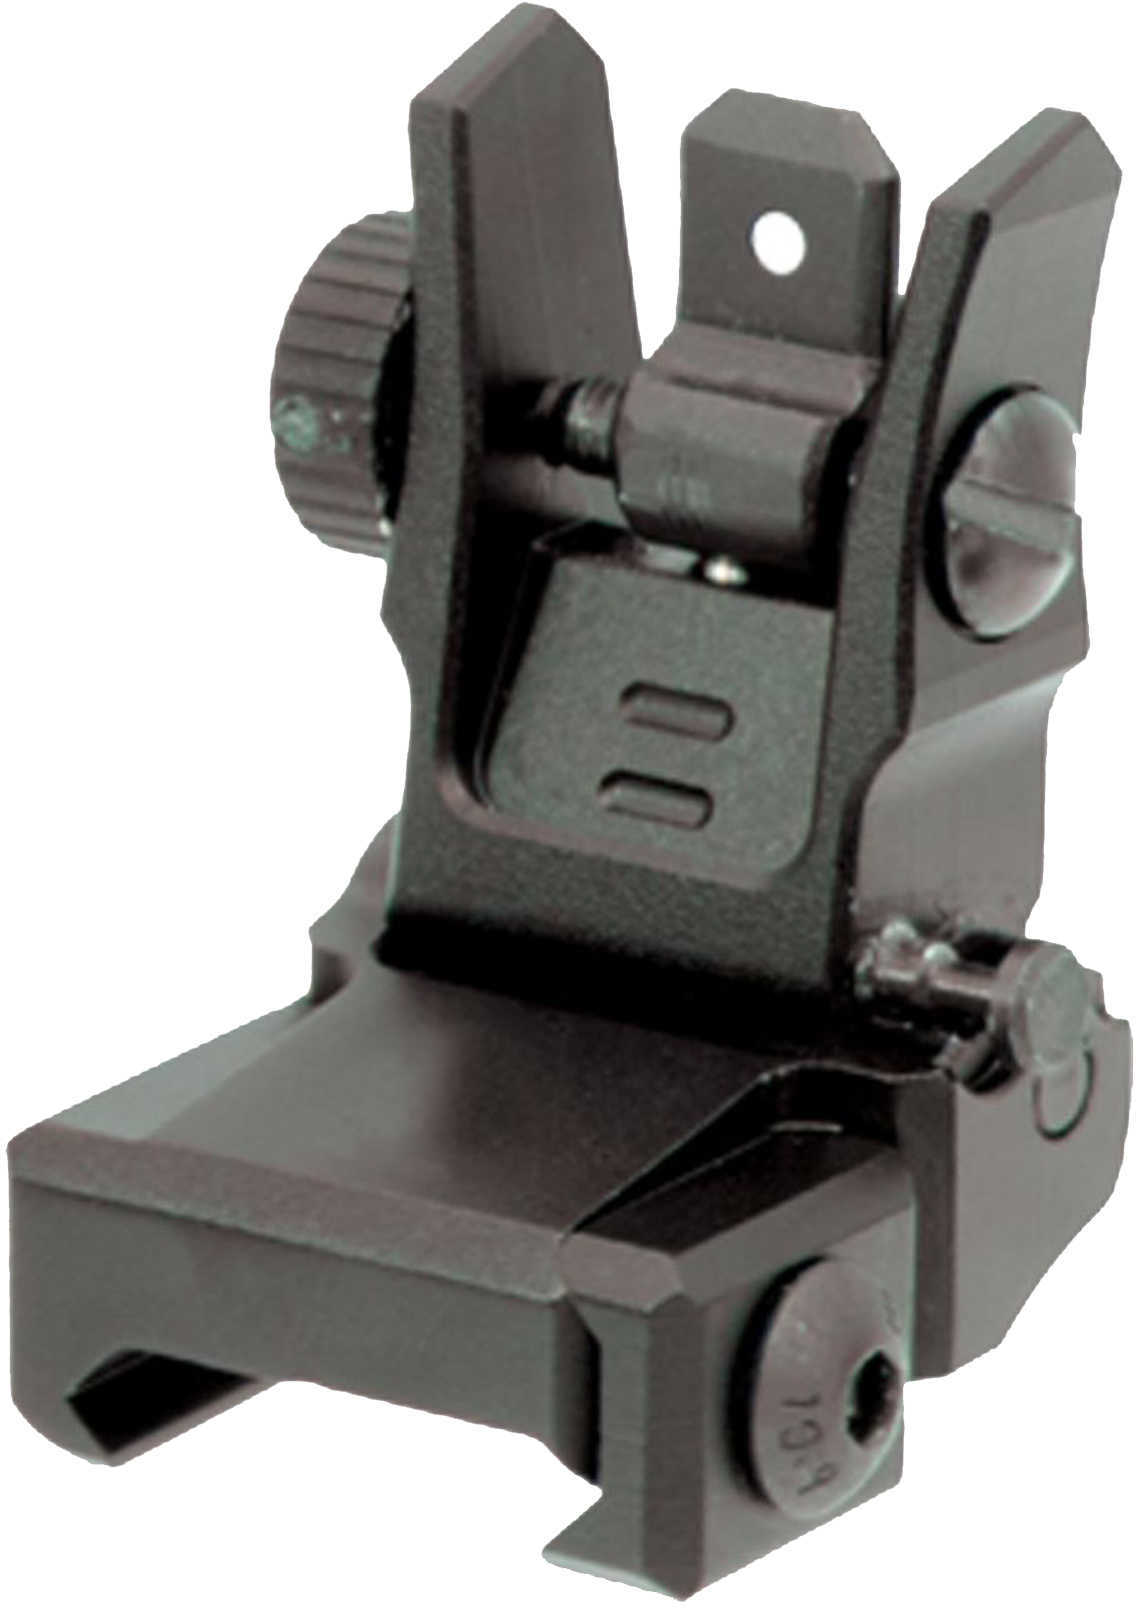 Leapers Inc. - UTG Sight Flip-Up Rear Low Profile Fits Picatinny with Dual Aiming Aperture Black Finish MNT-955